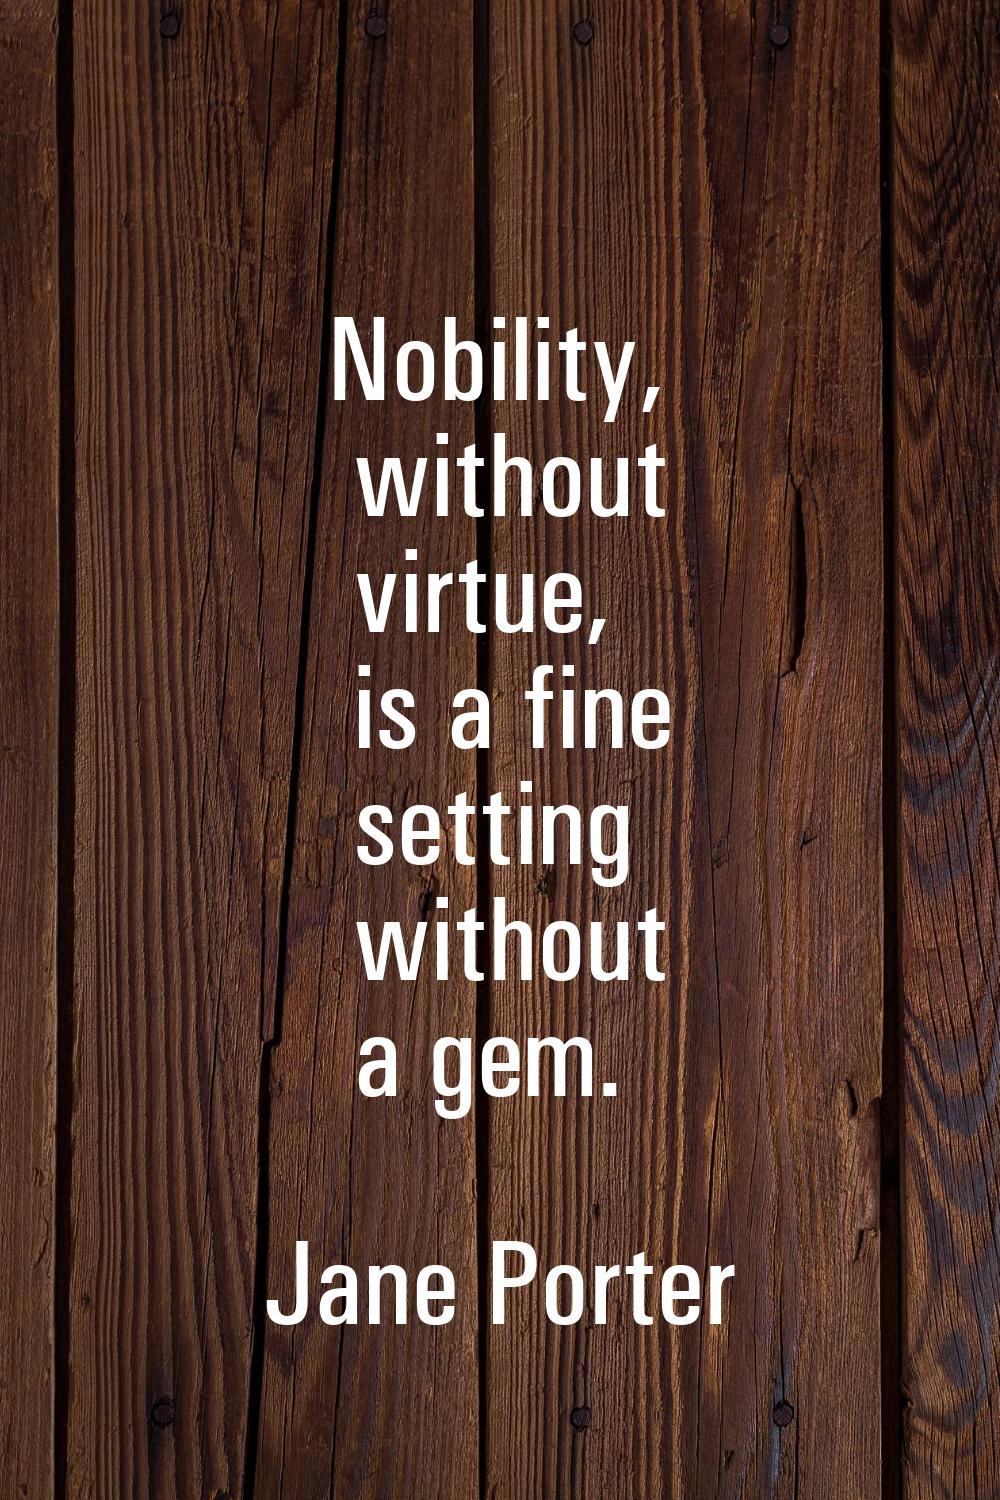 Nobility, without virtue, is a fine setting without a gem.